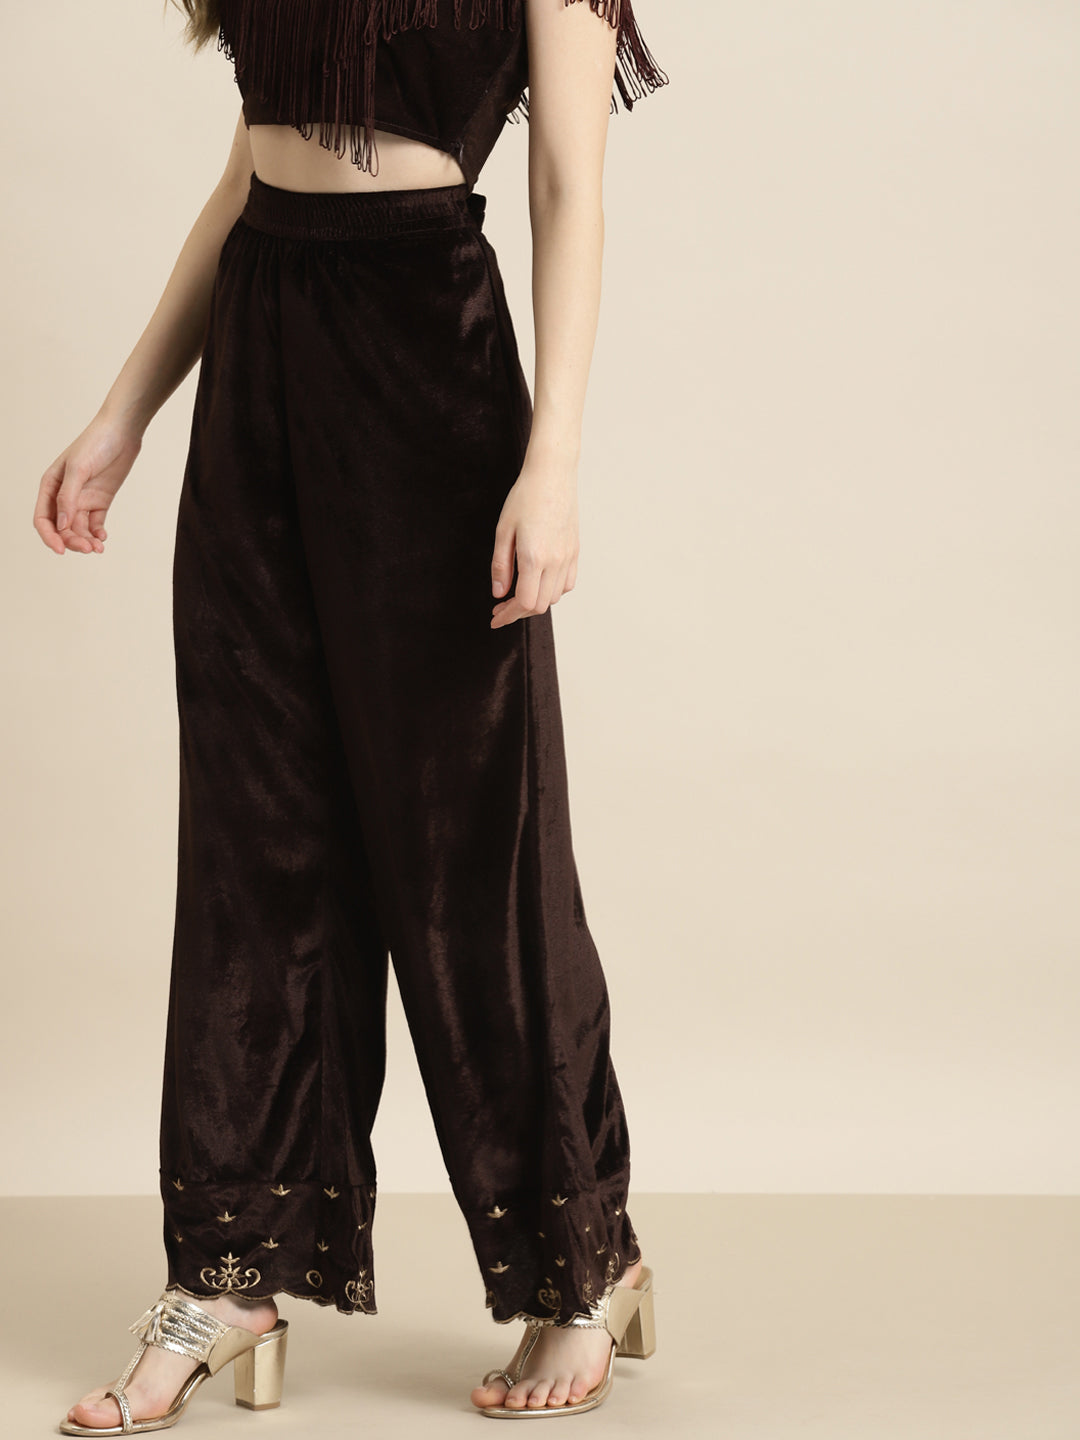 15 Outfits With Velvet Palazzo Pants - Styleoholic